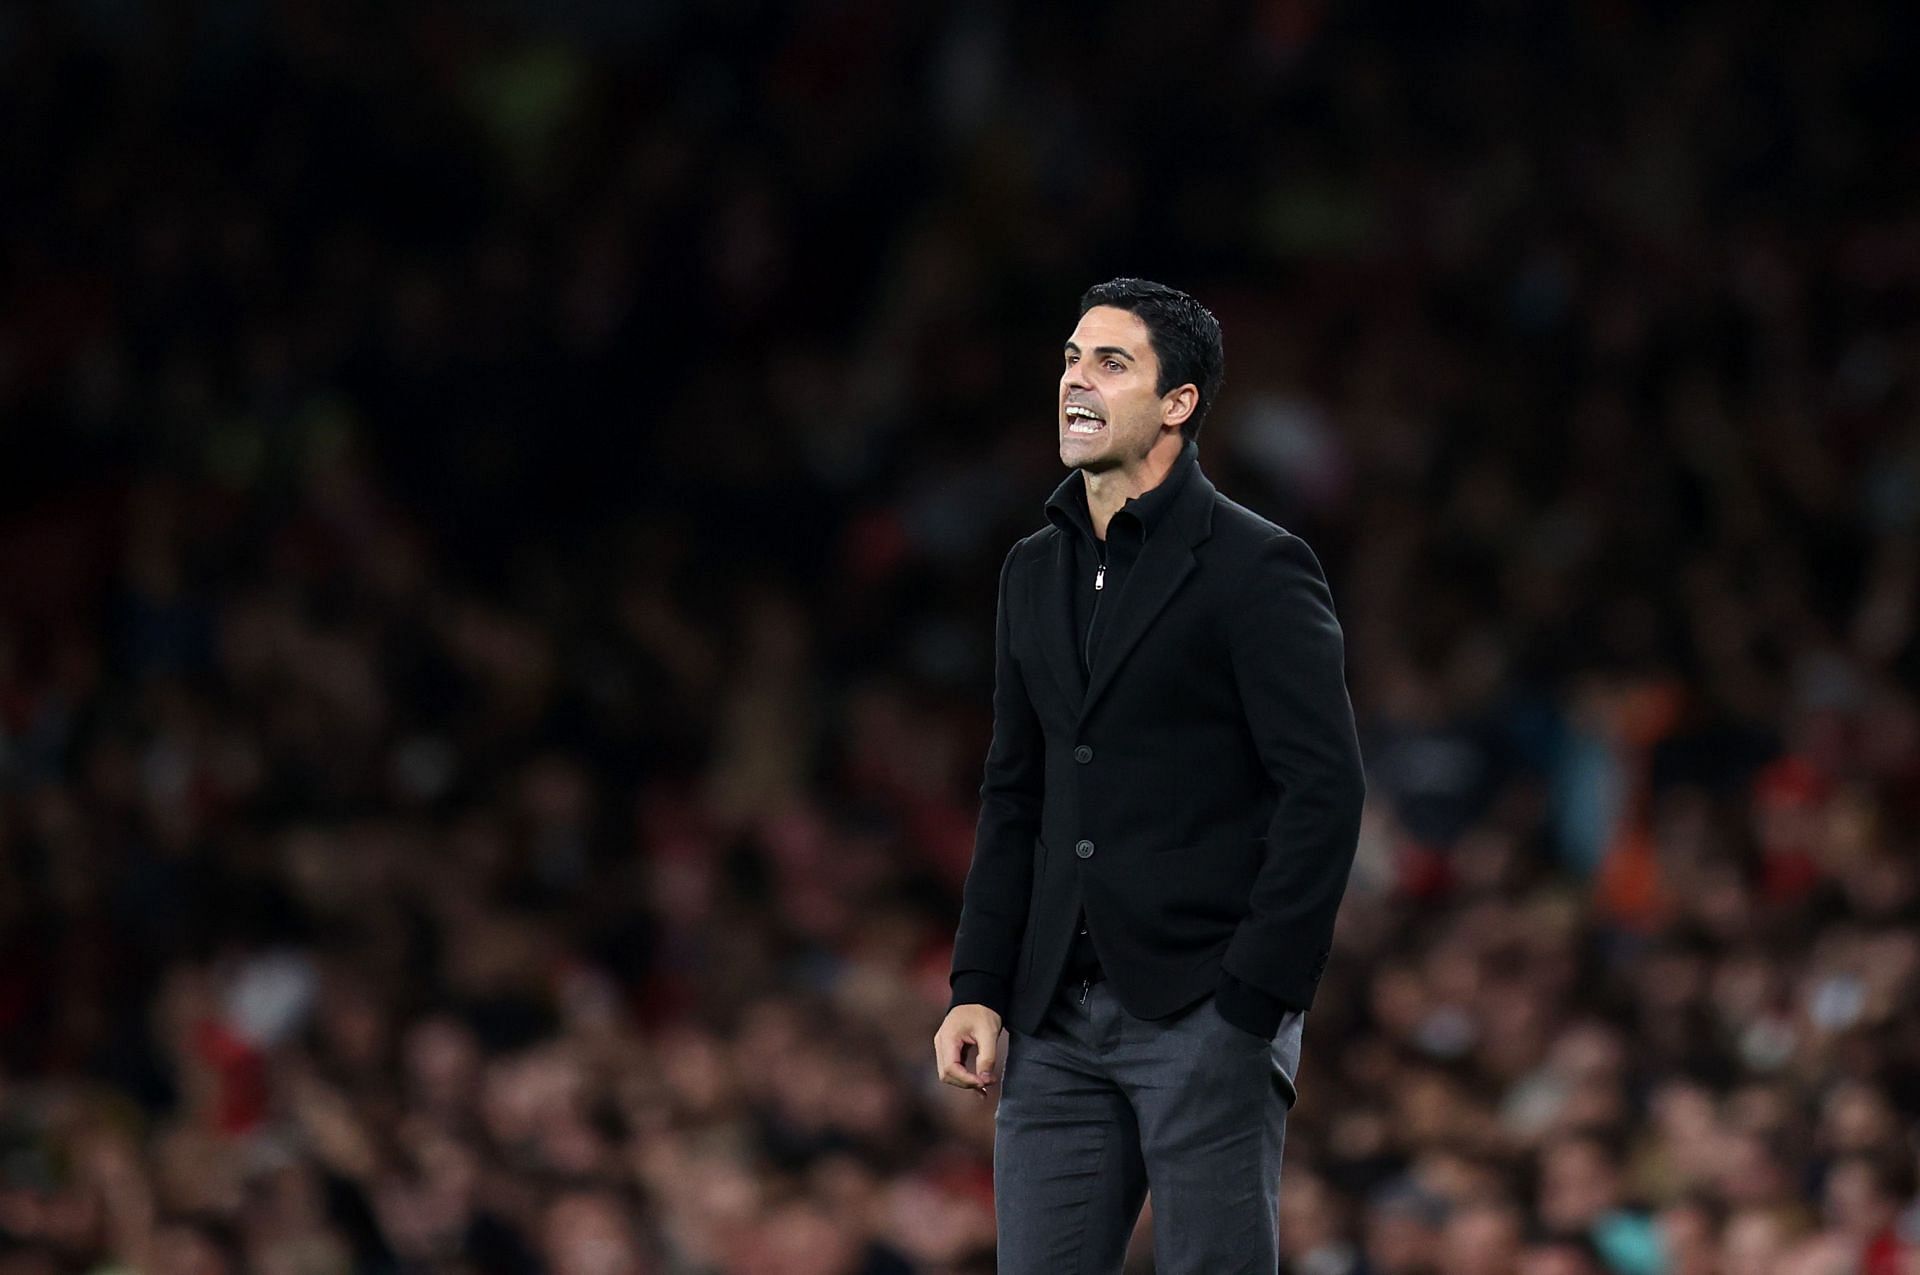 Mikel Arteta has overseen an impressive change in fortunes at Arsenal Brendan Rodgers&#039; side is struggling to put together a consistent run of results